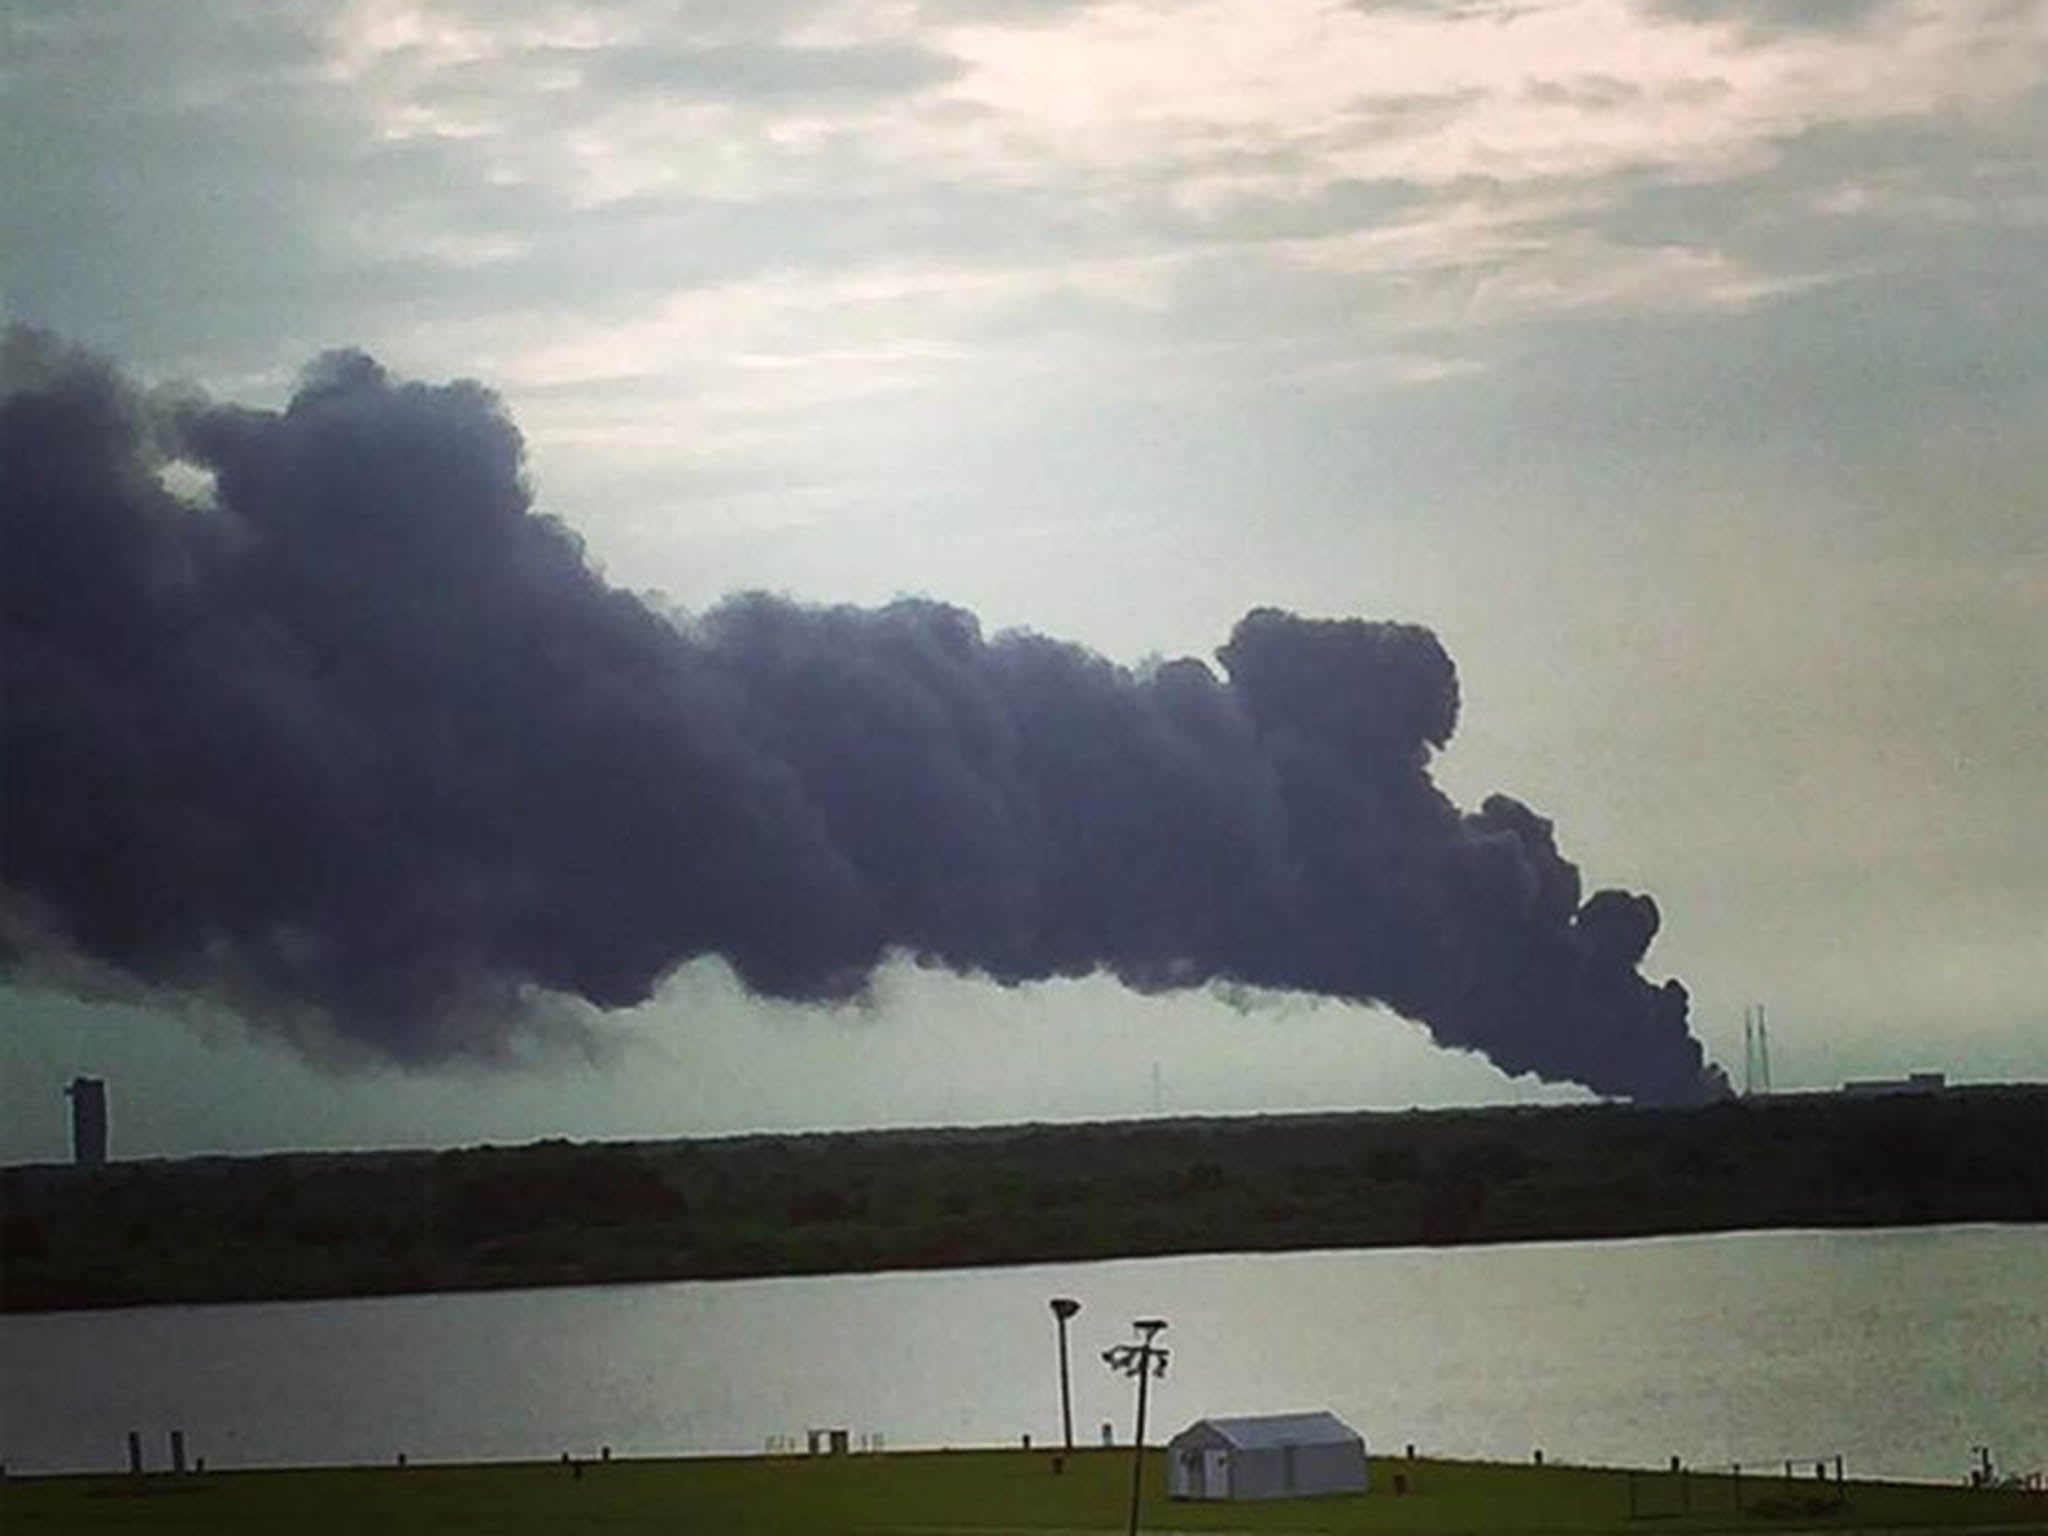 The SpaceX Falcon 9 rocket, which was scheduled to launch on 03 September, exploded during a test firing in Cape Canaveral, Florida